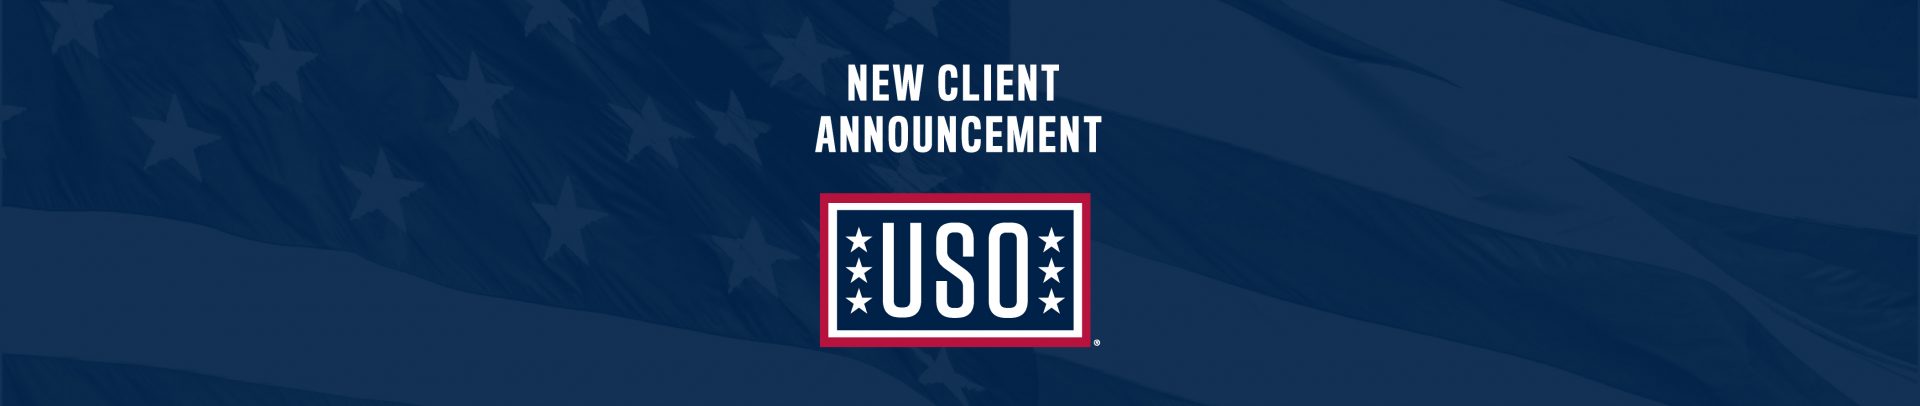 client partnership with uso